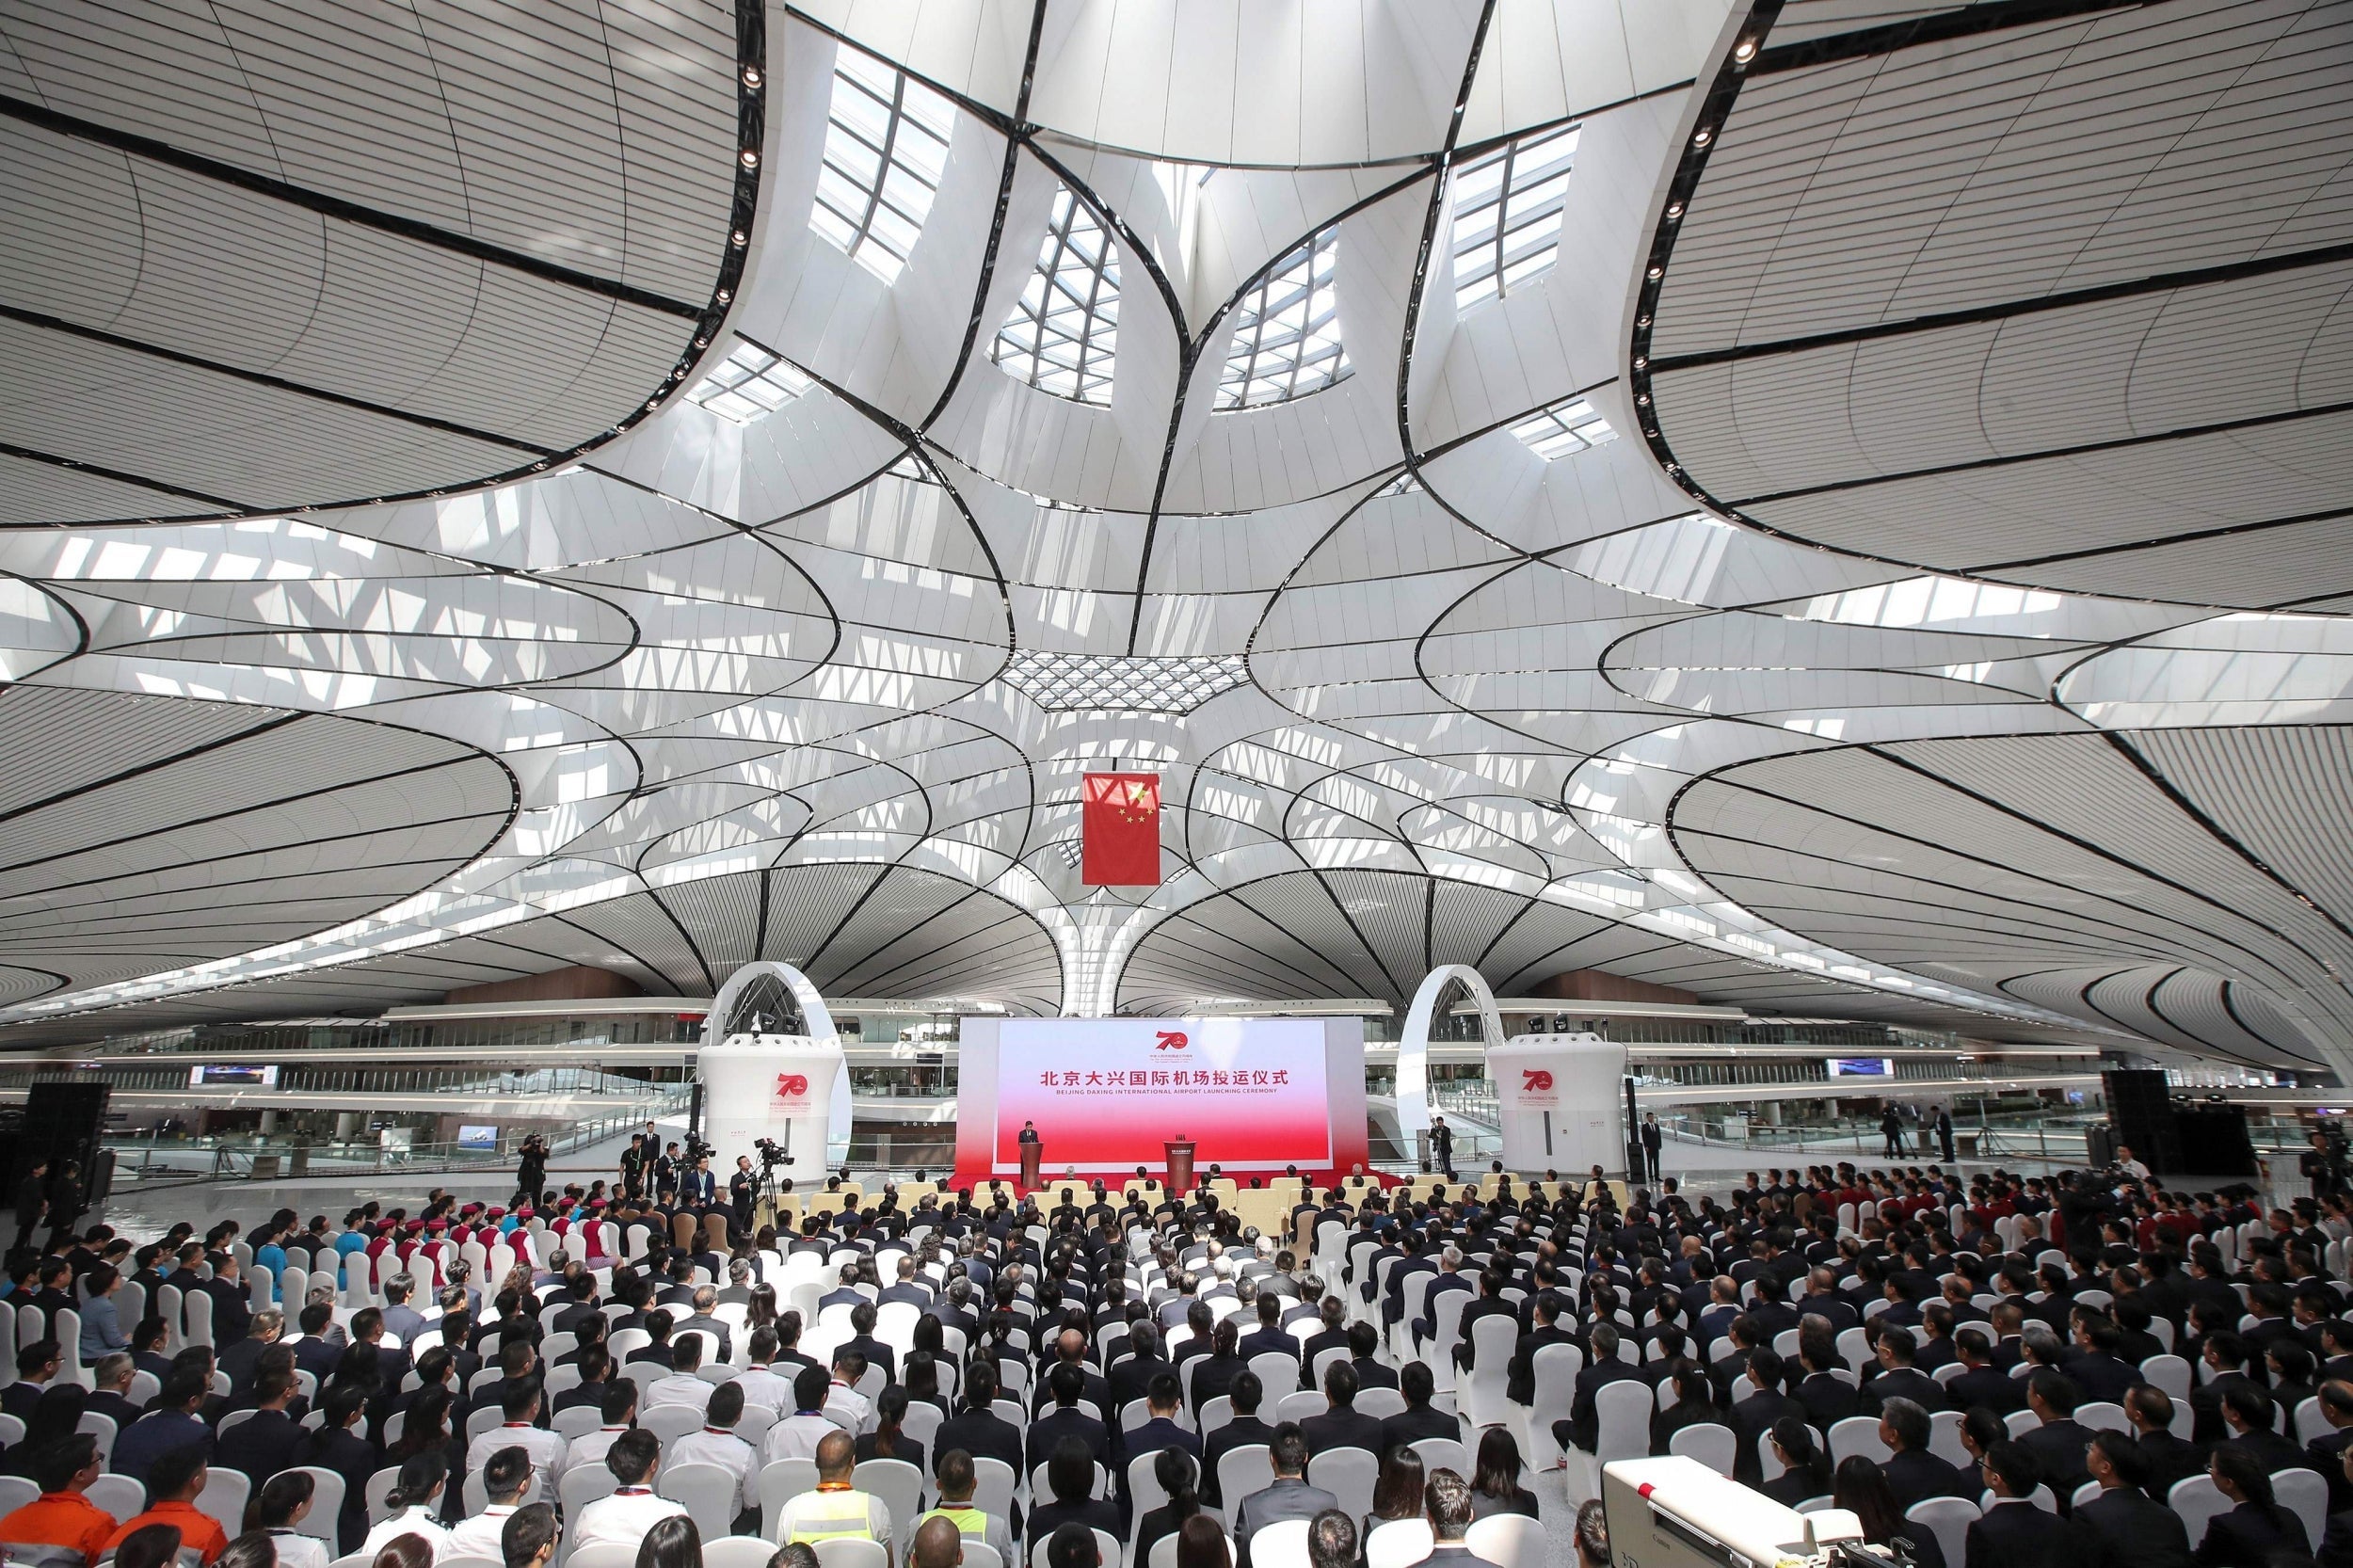 The opening ceremony for the new Beijing Daxing International Airport